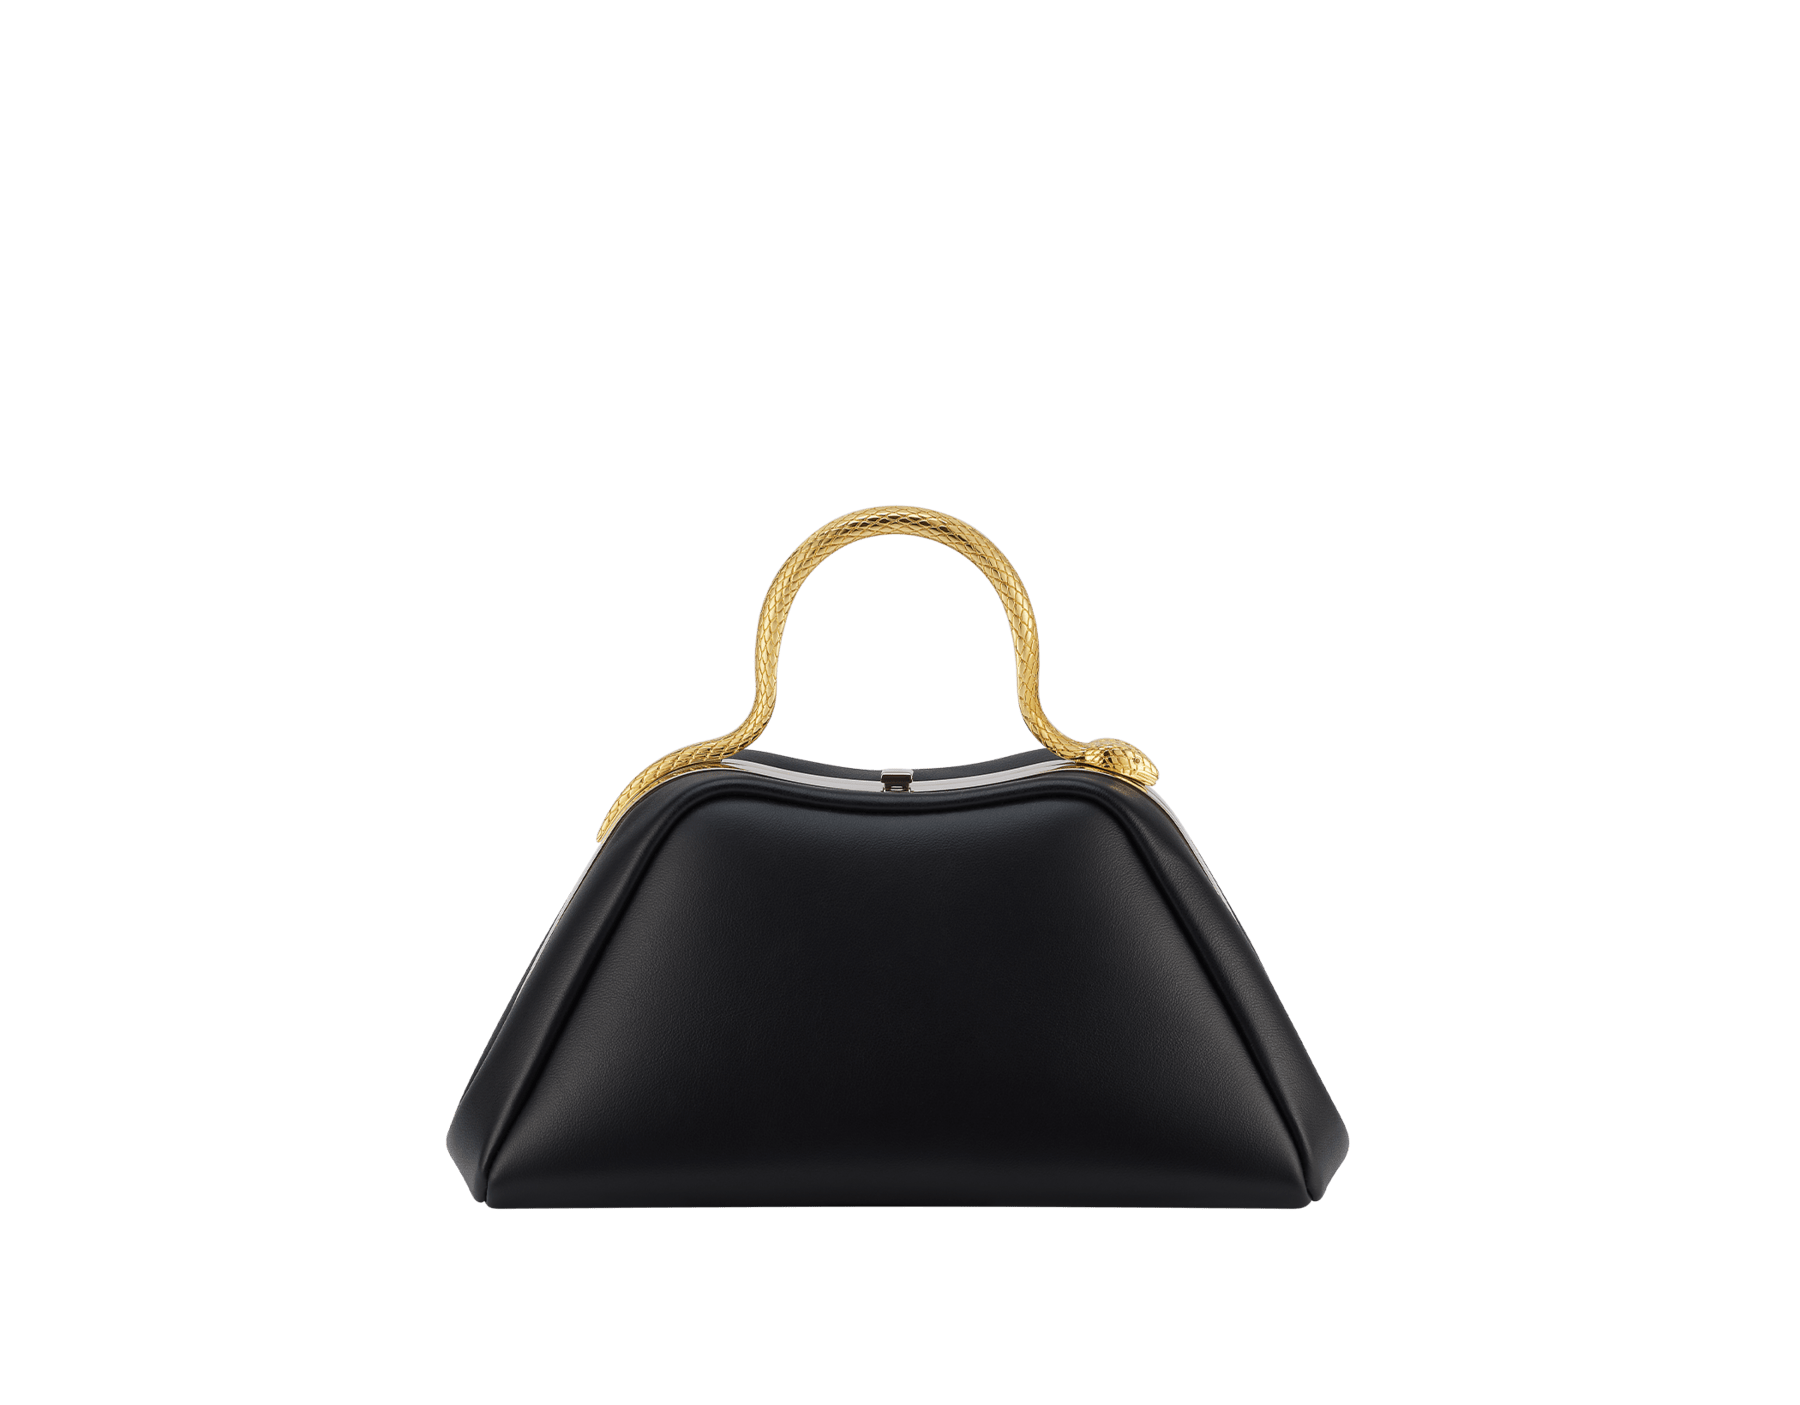 Serpentine mini top handle bag in black smooth calf leather with emerald green nappa leather lining. Captivating snake body-shaped top handle in gold-plated brass embellished with engraved scales and red enamel eyes, press-button closure and light gold-plated brass hardware. SRN-1291 image 1